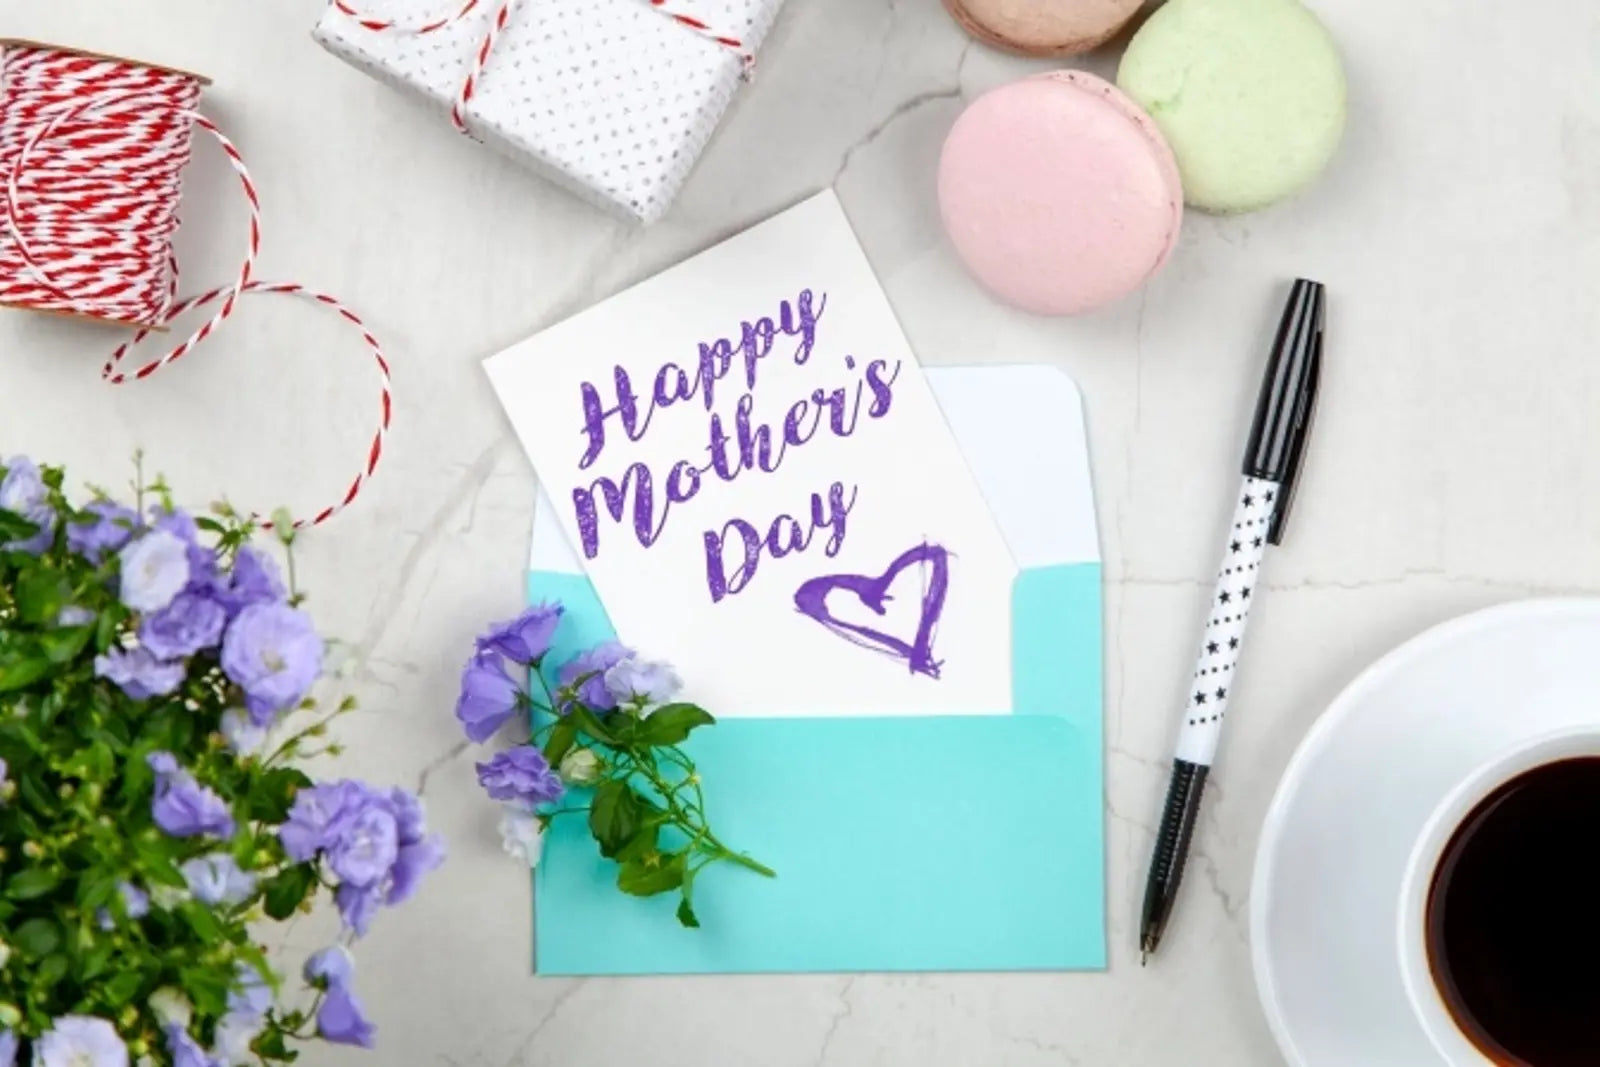 Lovely Mother’s Day Party Ideas to Make Her Feel Special